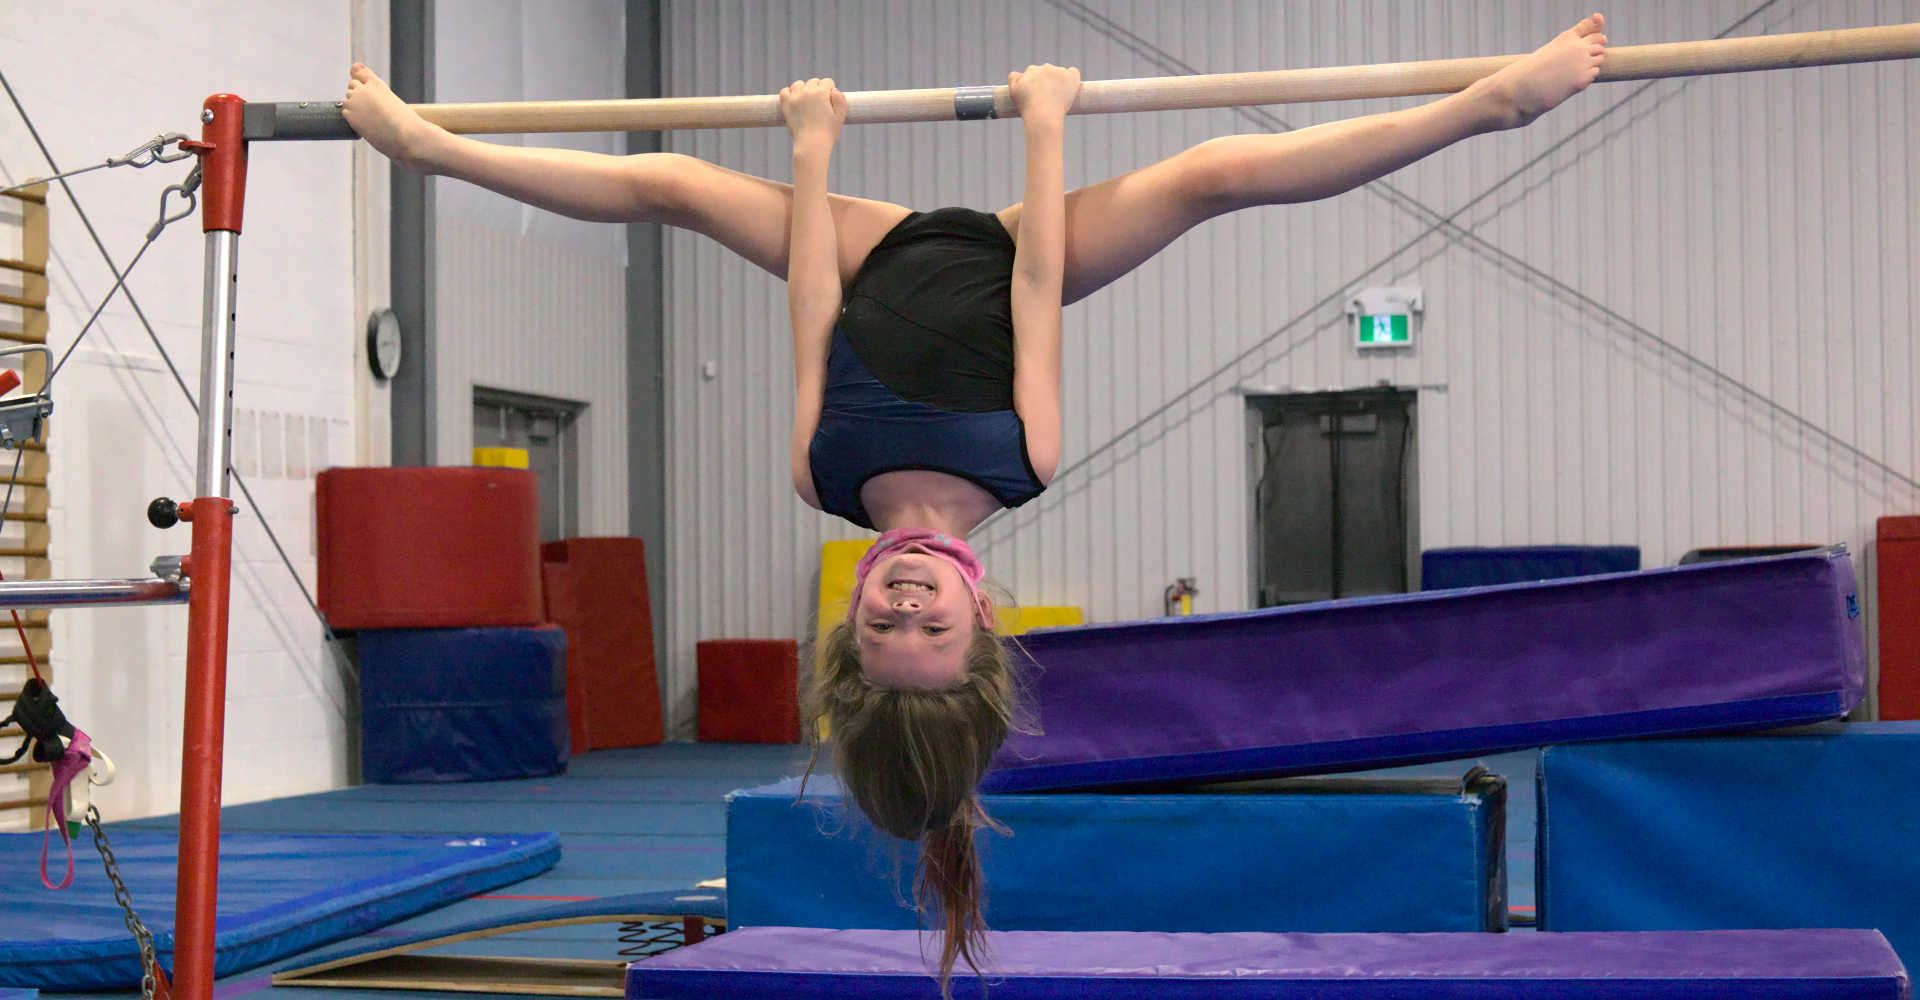 A smiling young gymnast, hanging upside down on the bar, takes a small break to catch a breath and strike a pose at Gymworld Adventures in Gymnastics in Northwest London